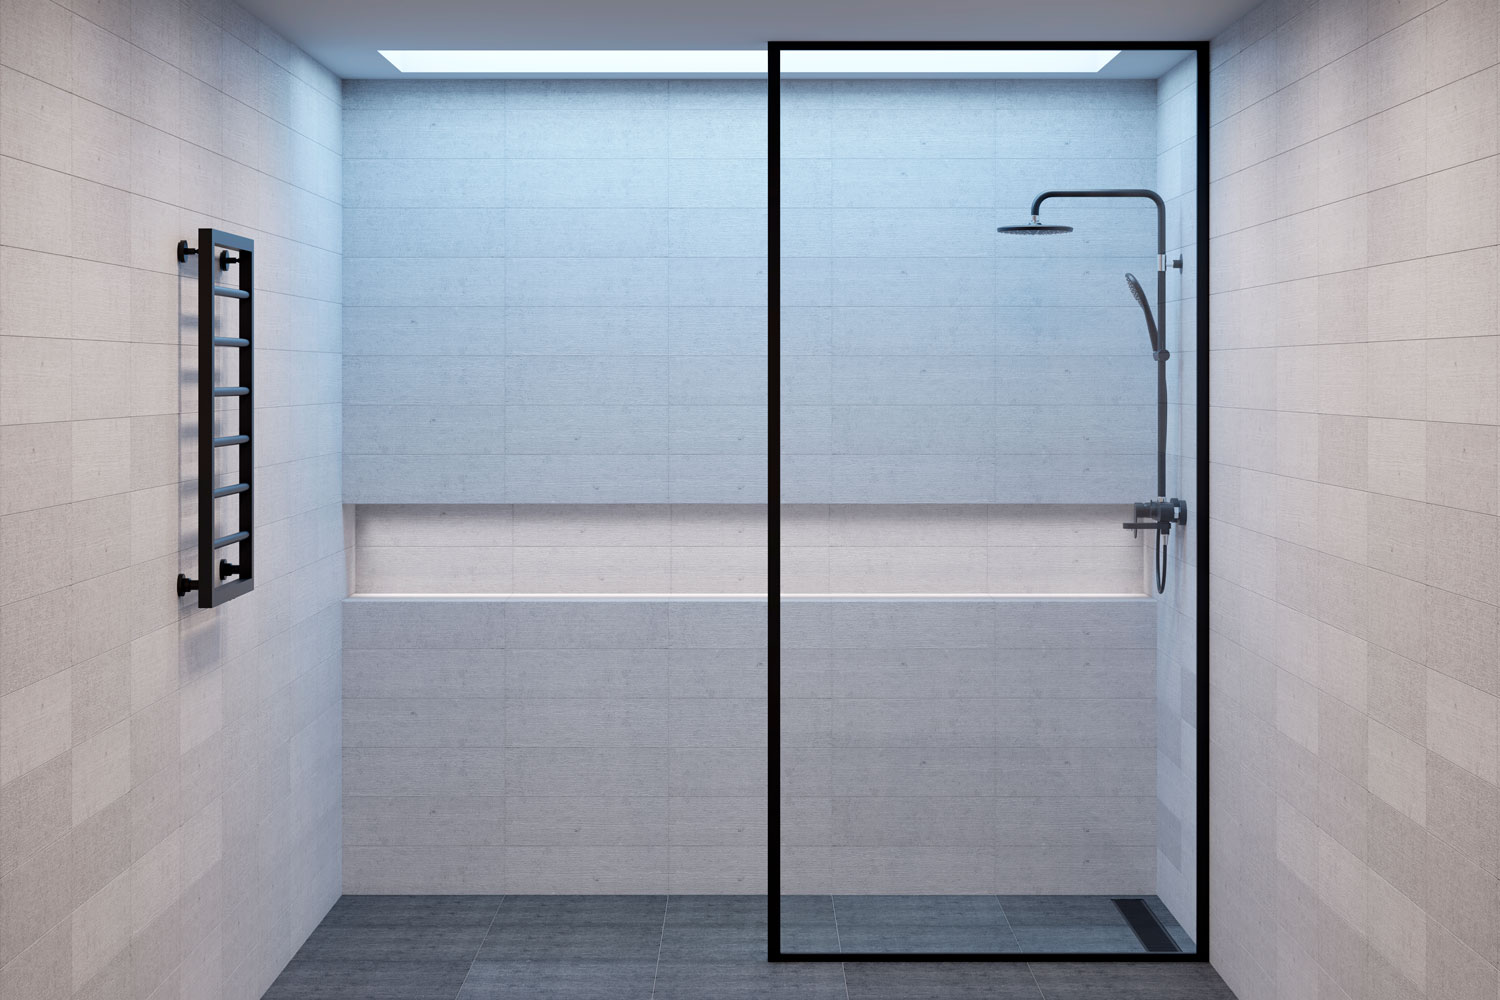 Minimalist themed glass shower area with light gray tiled bathroom walls